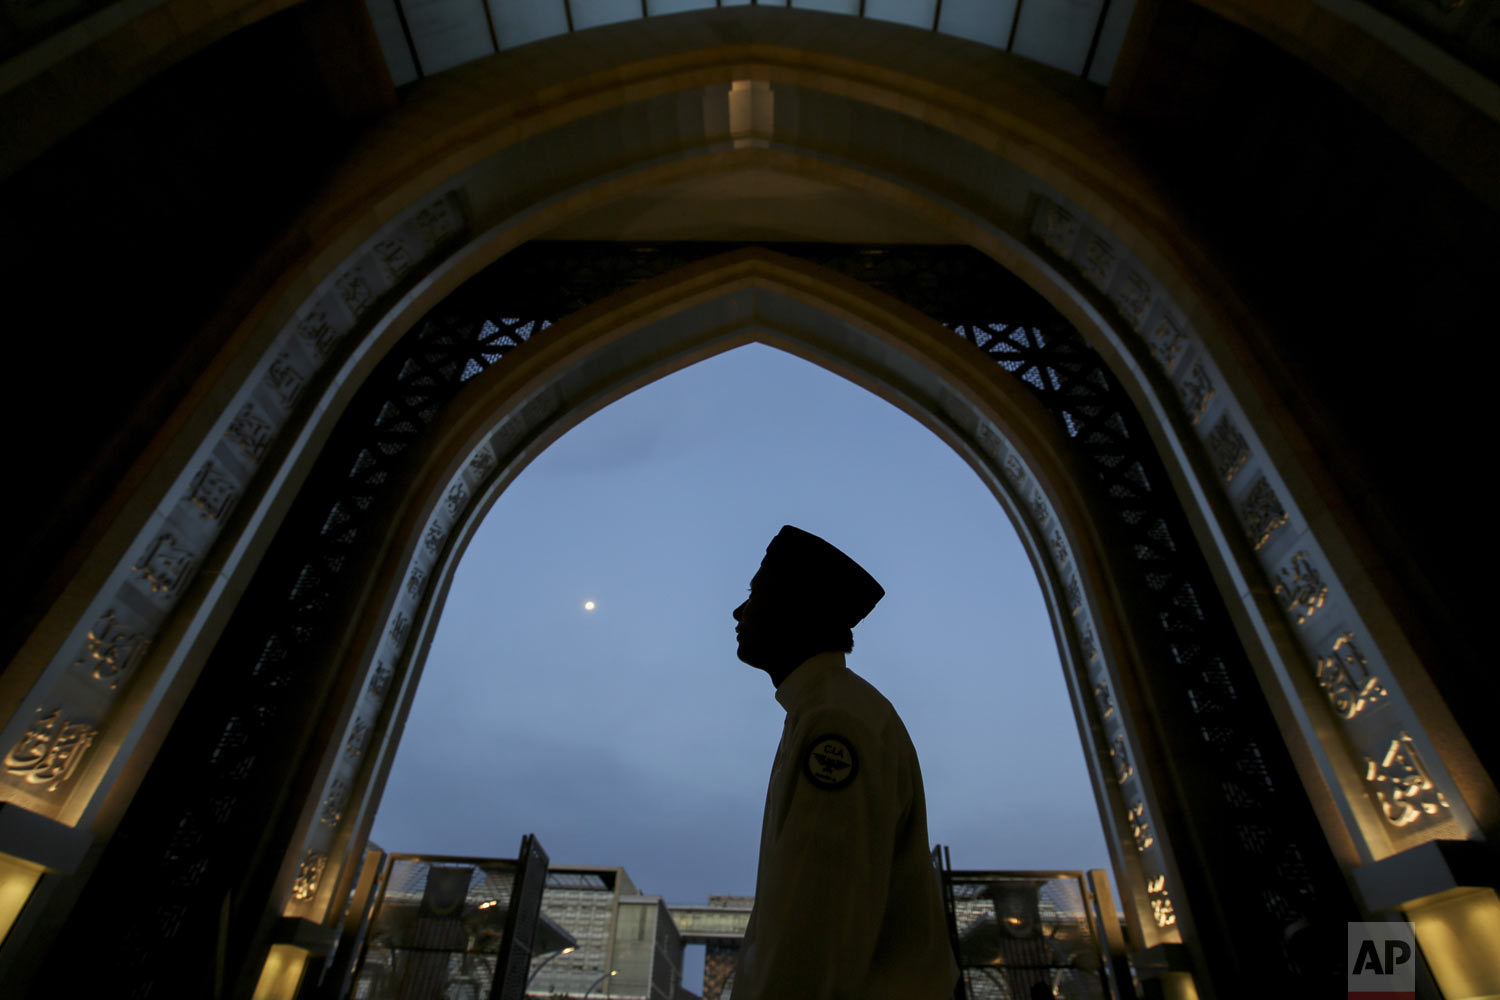  A worshipper arrives at a mosque for Iftar during the holy Islamic month of Ramadan in Kuala Lumpur, Malaysia, Thursday, May 16, 2019. (AP Photo/Annice Lyn) 